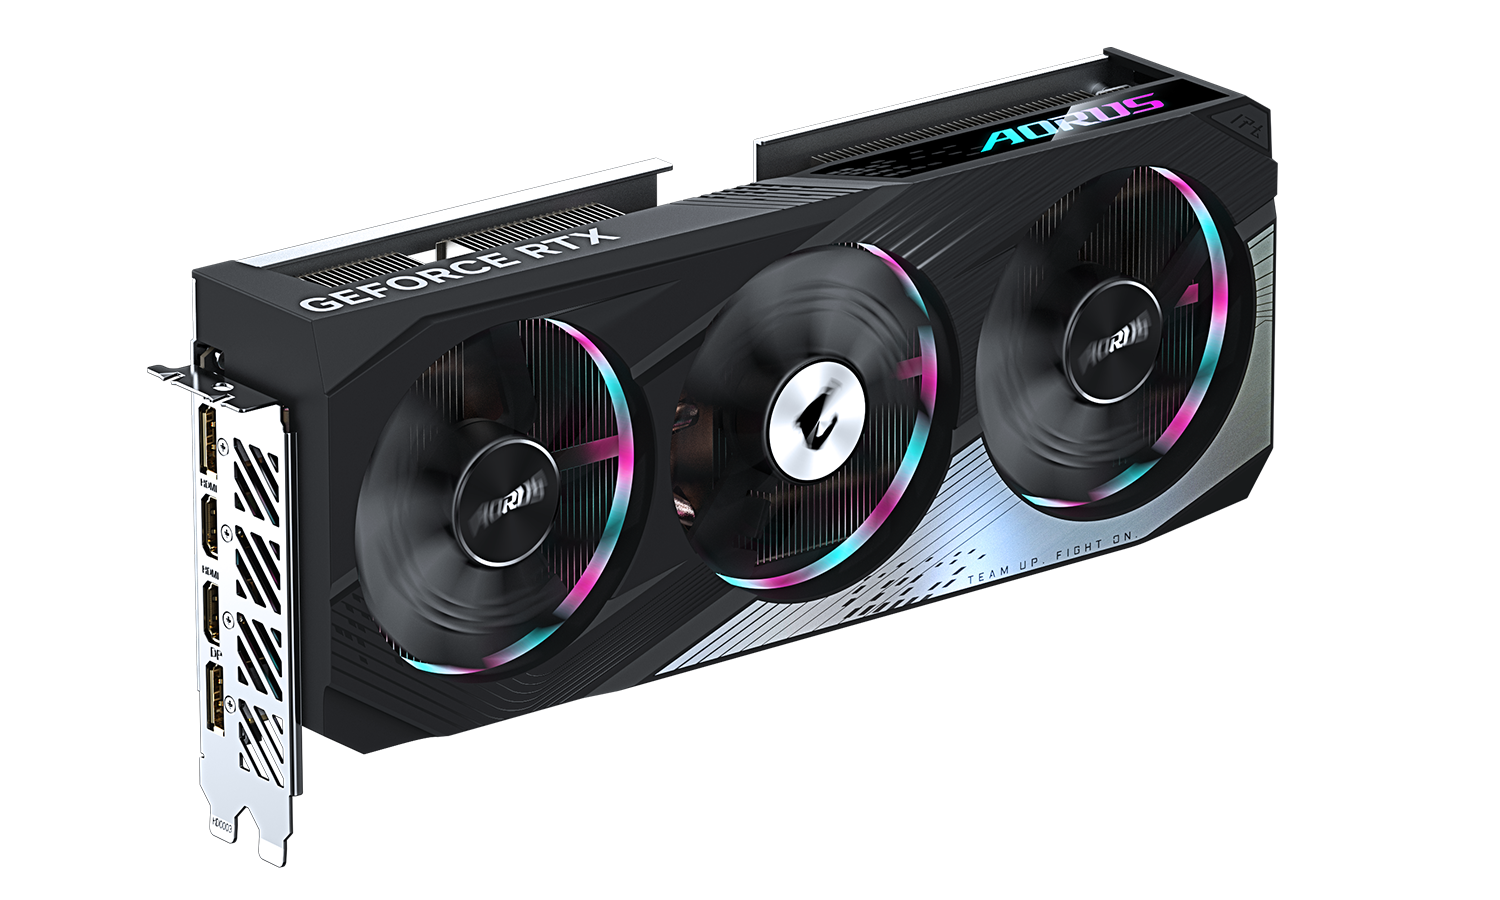 Is the nVidia RTX 4060 Ideal for Stable Diffusion and AI Gaming